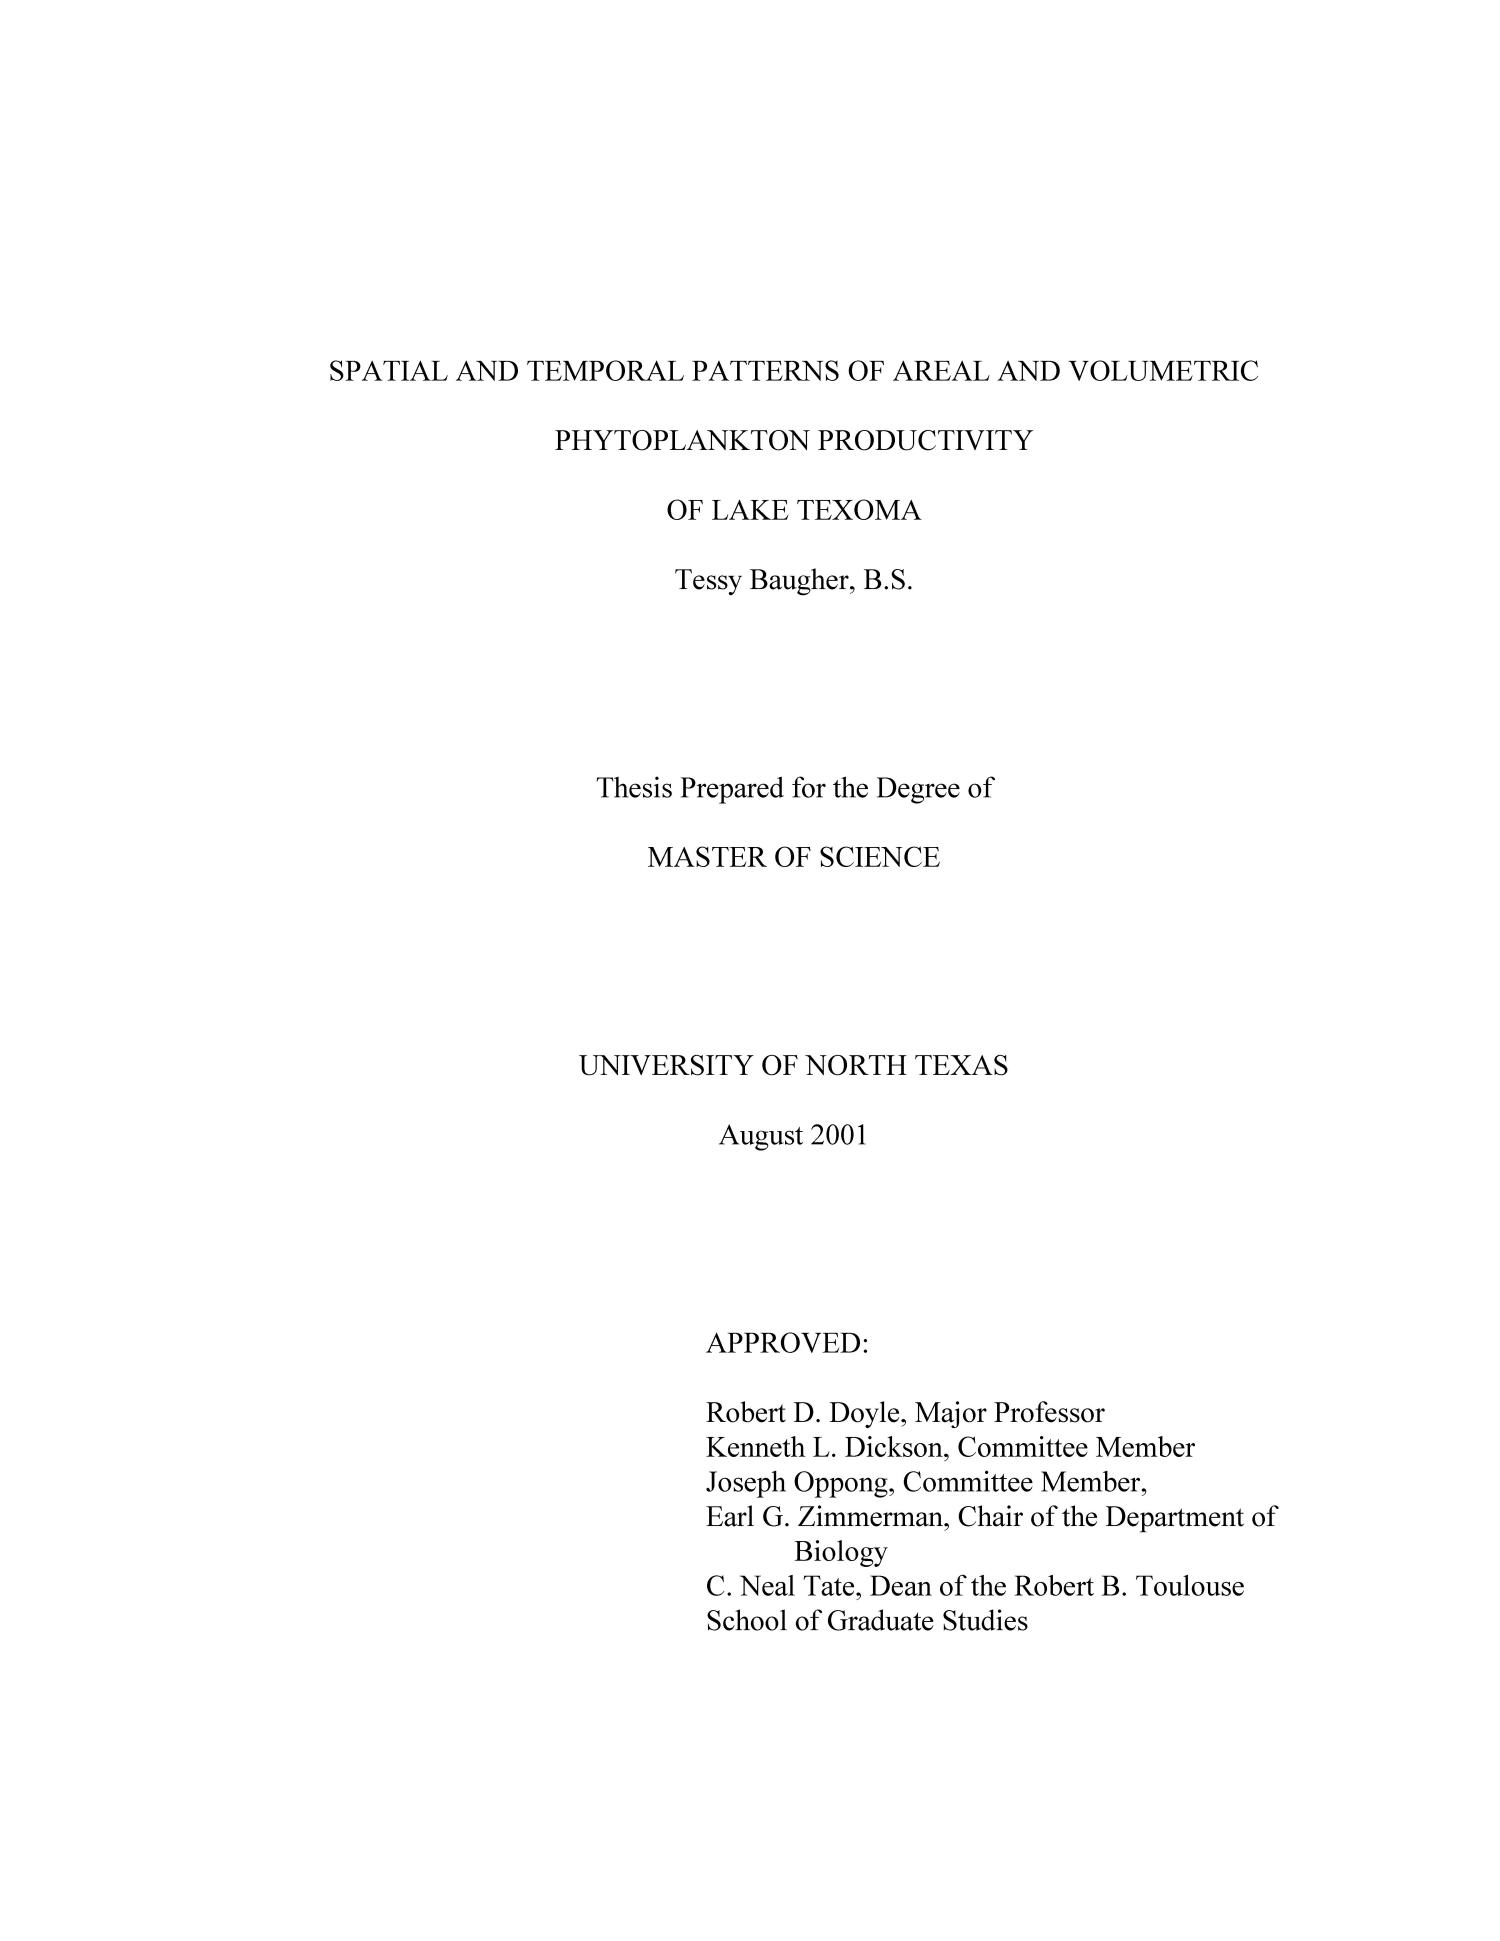 Spatial and Temporal Patterns of Areal and Volumetric Phytoplankton Productivity of Lake Texoma
                                                
                                                    Title Page
                                                